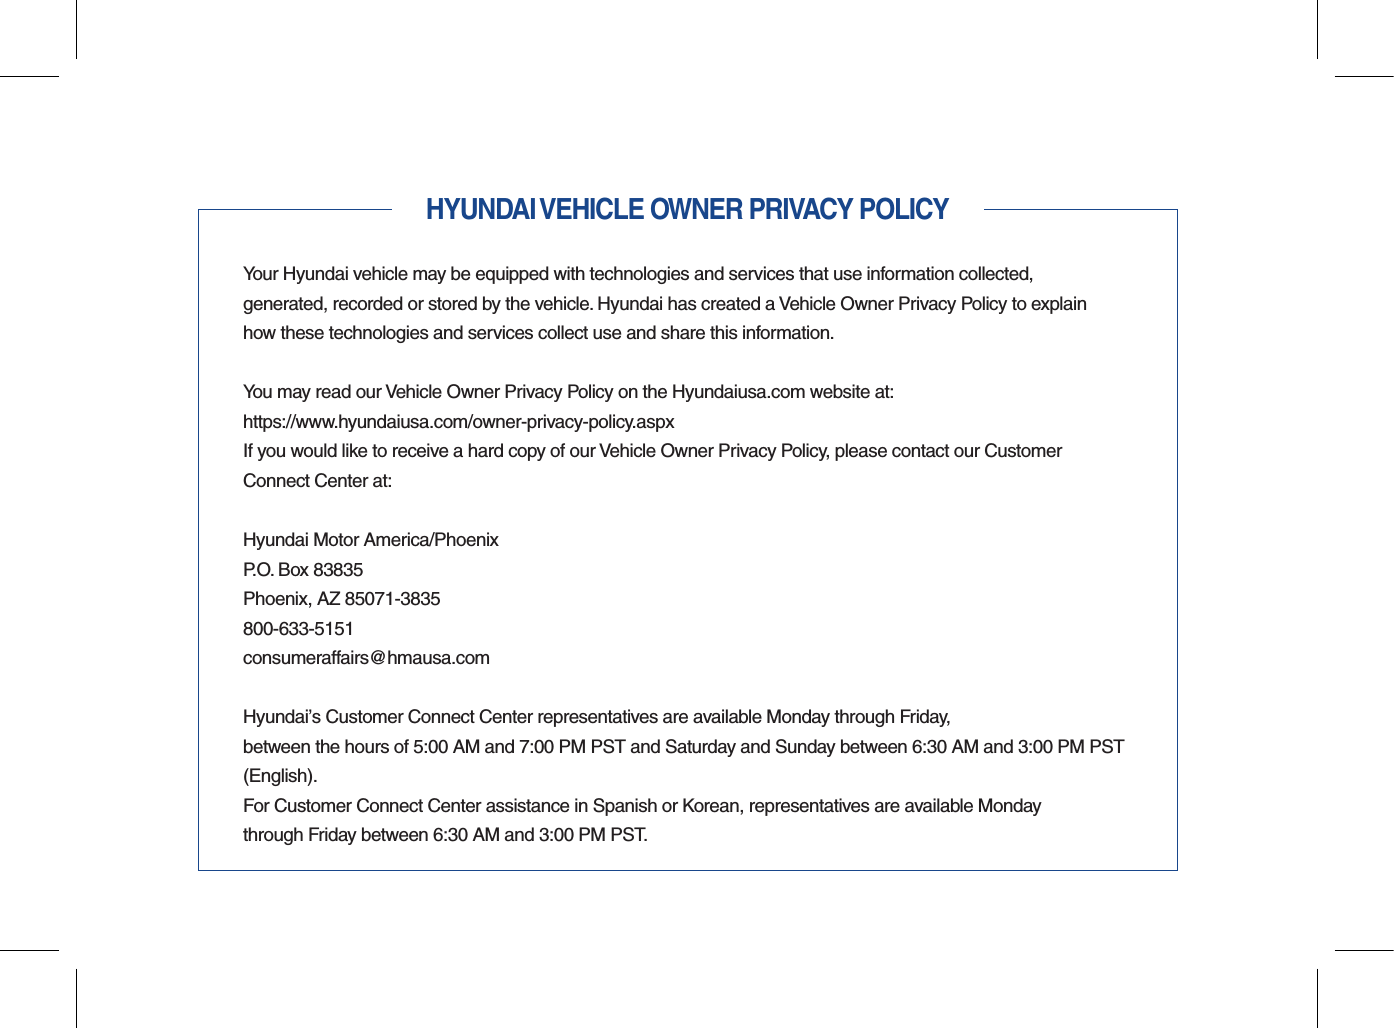 HYUNDAI VEHICLE OWNER PRIVACY POLICYYour Hyundai vehicle may be equipped with technologies and services that use information collected,  generated, recorded or stored by the vehicle. Hyundai has created a Vehicle Owner Privacy Policy to explain how these technologies and services collect use and share this information.You may read our Vehicle Owner Privacy Policy on the Hyundaiusa.com website at:https://www.hyundaiusa.com/owner-privacy-policy.aspxIf you would like to receive a hard copy of our Vehicle Owner Privacy Policy, please contact our Customer Connect Center at:Hyundai Motor America/PhoenixP.O. Box 83835Phoenix, AZ 85071-3835800-633-5151consumeraffairs@hmausa.comHyundai’s Customer Connect Center representatives are available Monday through Friday,  between the hours of 5:00 AM and 7:00 PM PST and Saturday and Sunday between 6:30 AM and 3:00 PM PST (English).For Customer Connect Center assistance in Spanish or Korean, representatives are available Monday  through Friday between 6:30 AM and 3:00 PM PST.